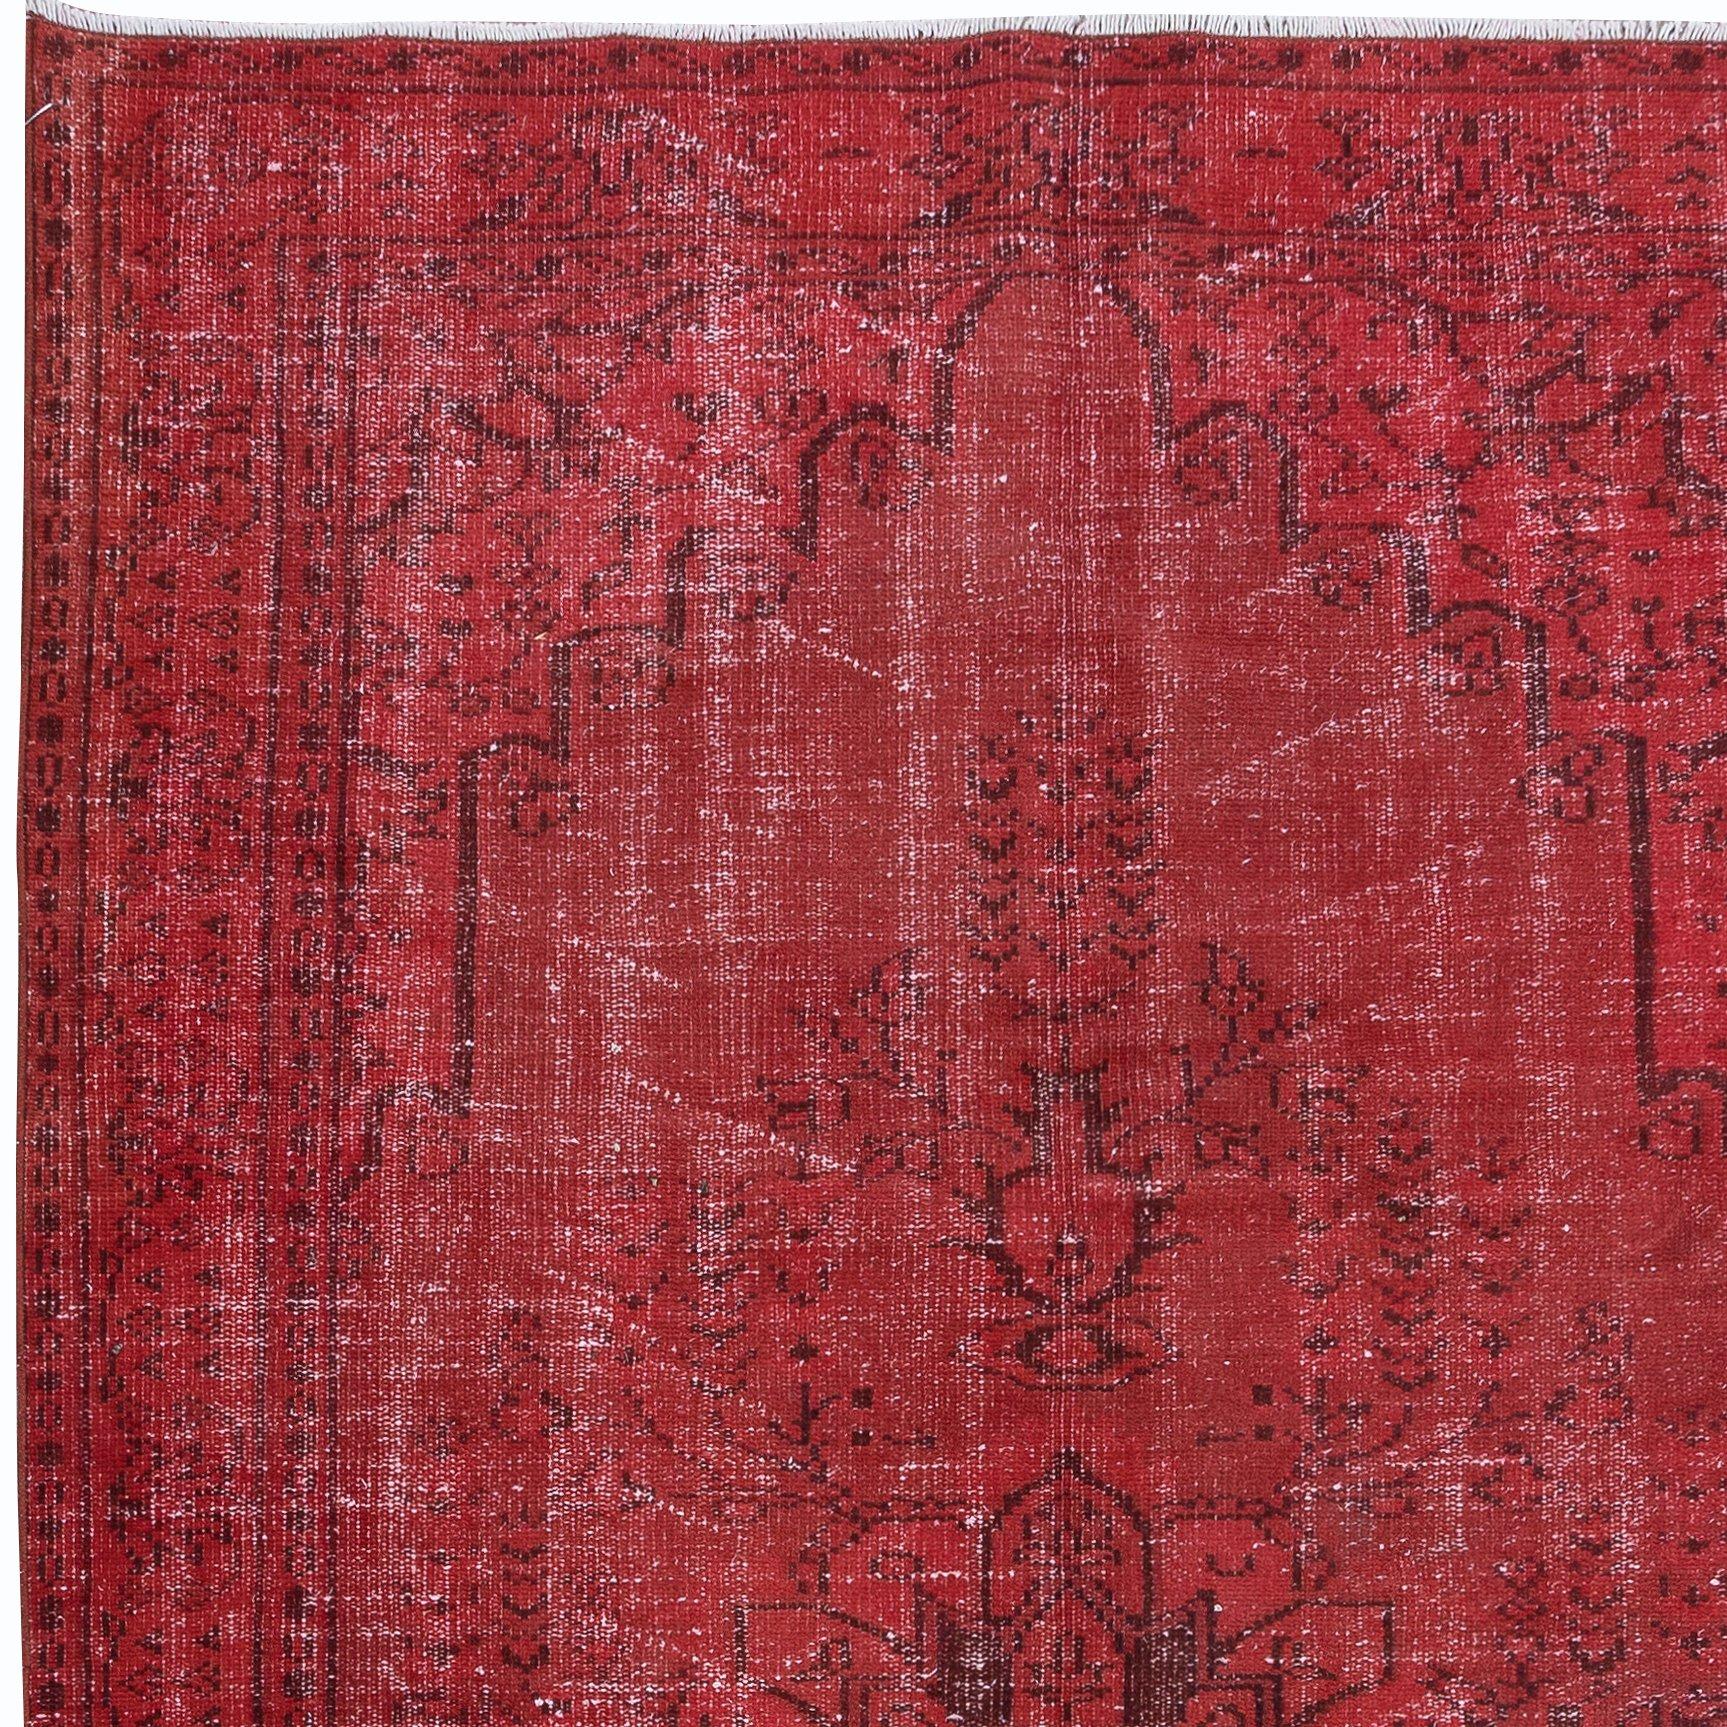 Turkish 5x8.3 Ft Red Handmade Room Size Rug, Wool and Cotton Carpet from Turkey For Sale